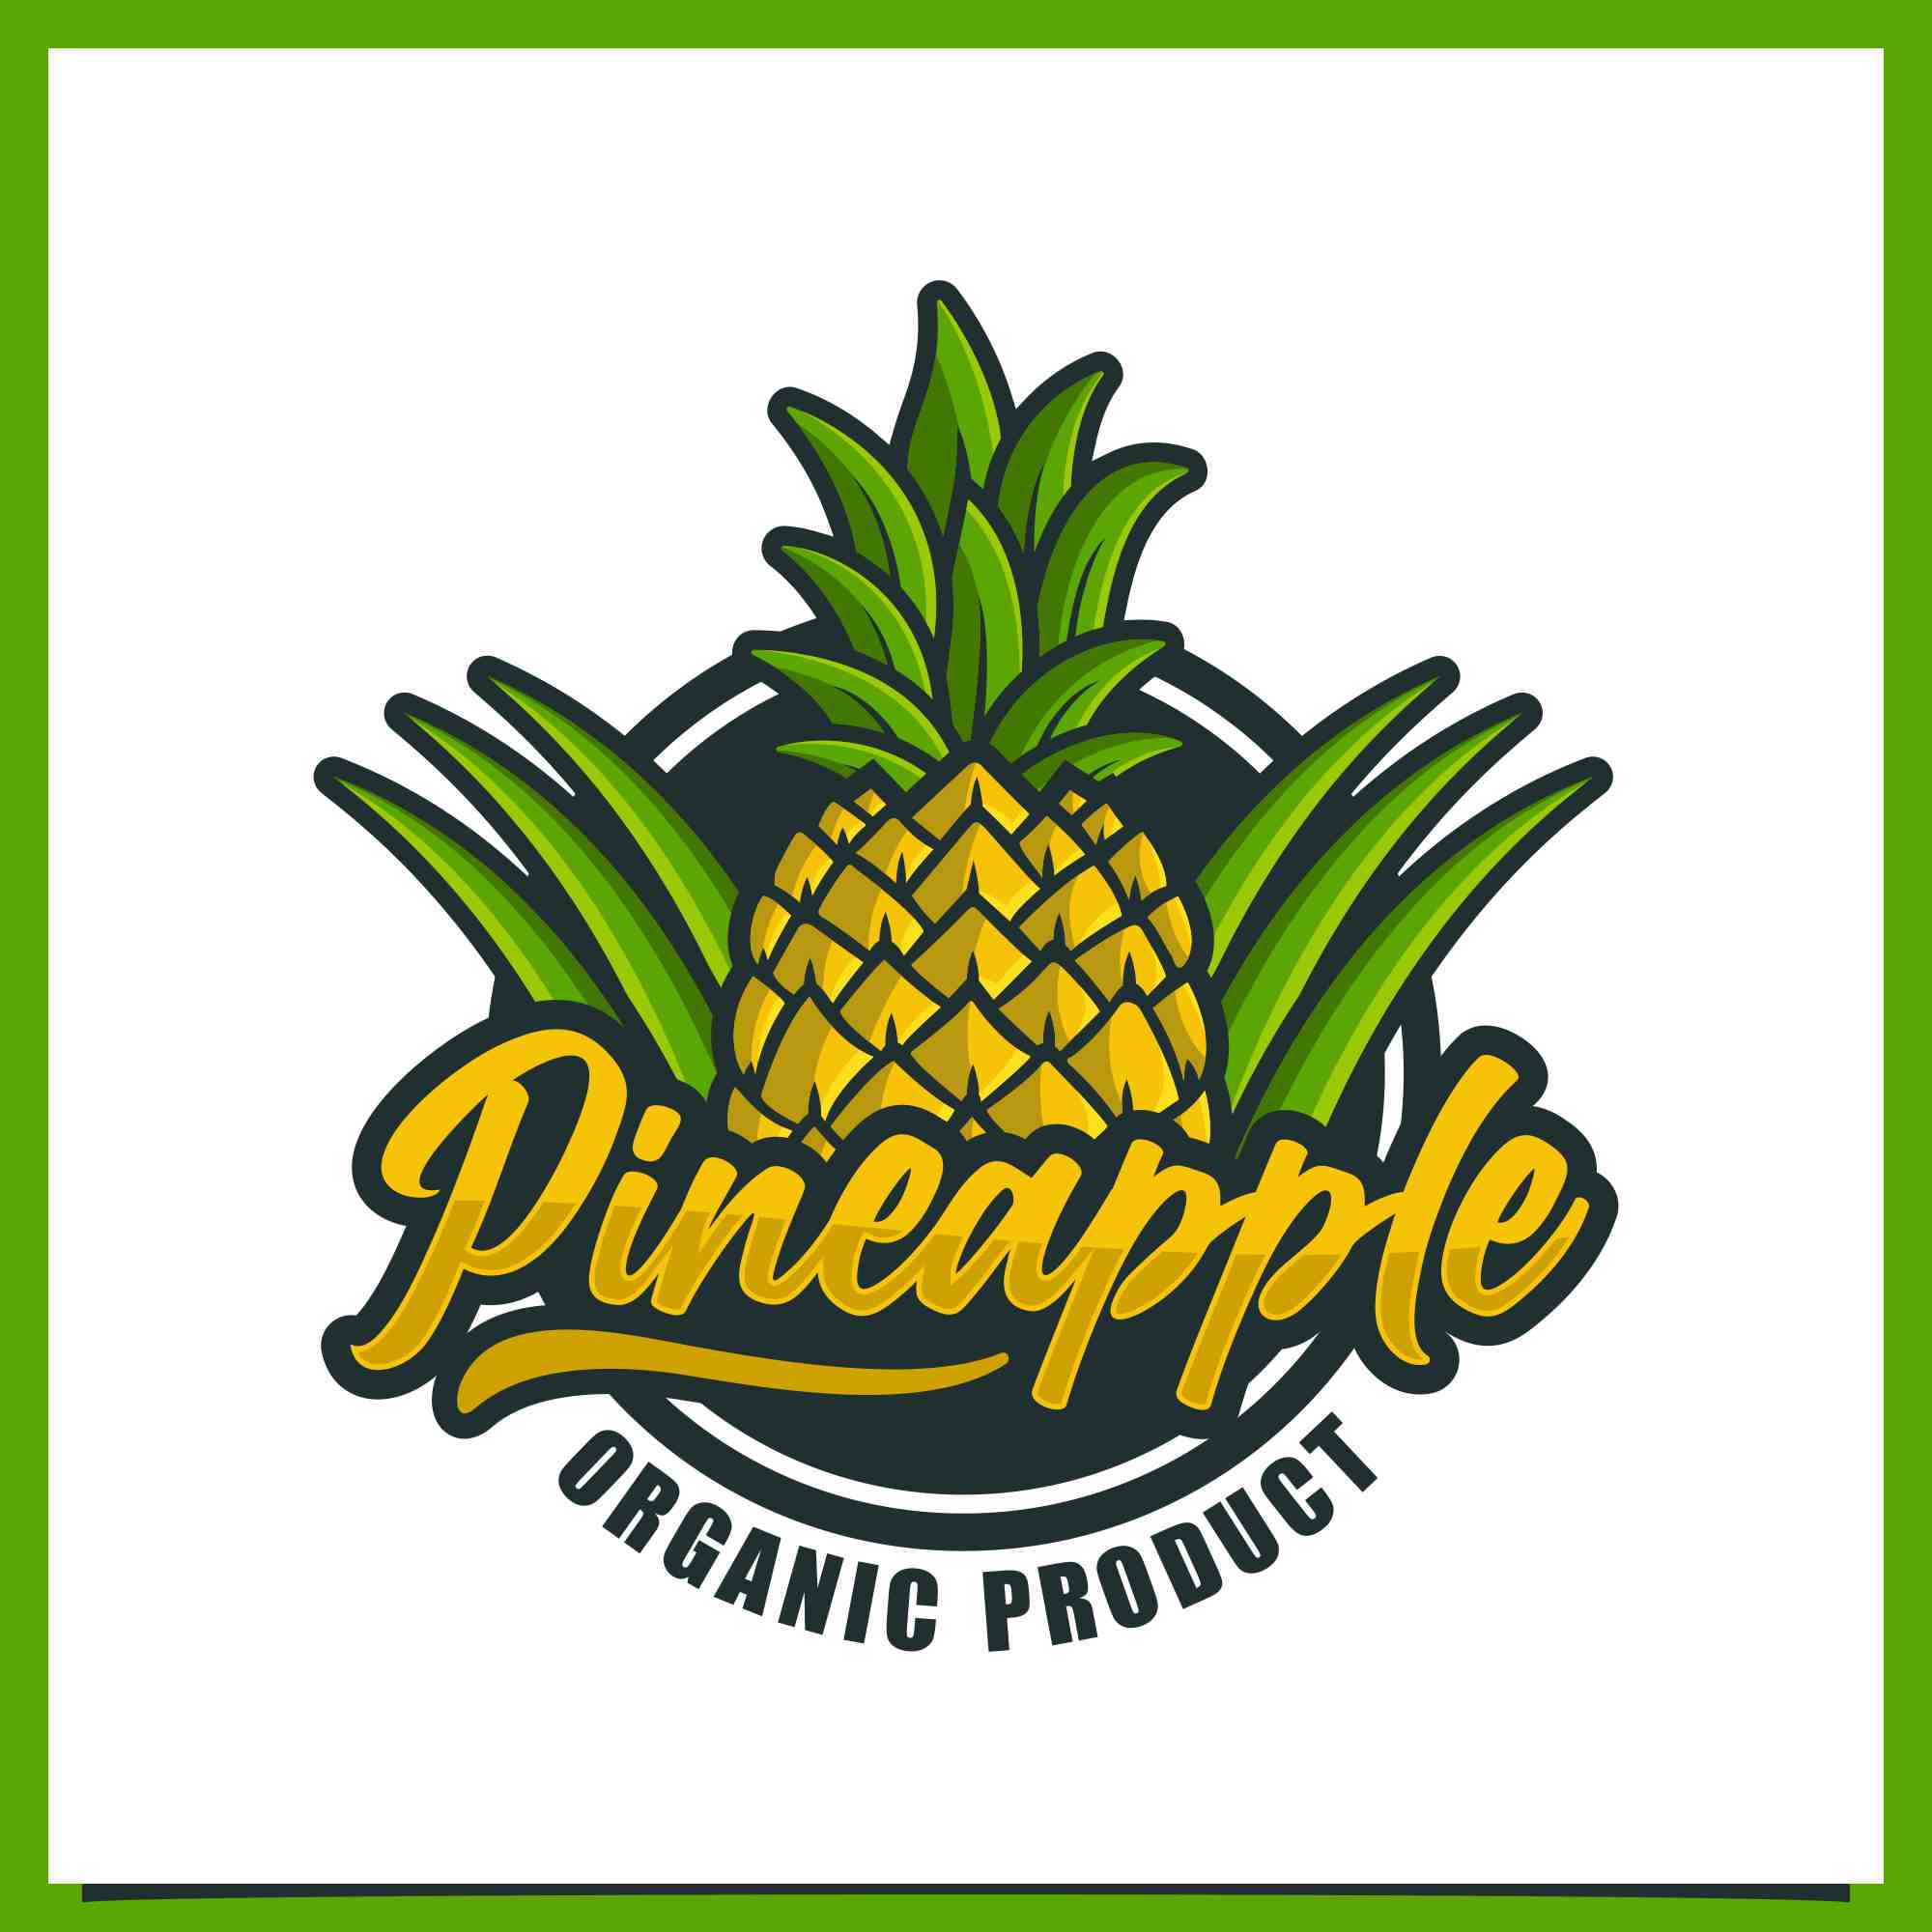 Set Pineapple badge logo design collection - $8 preview image.